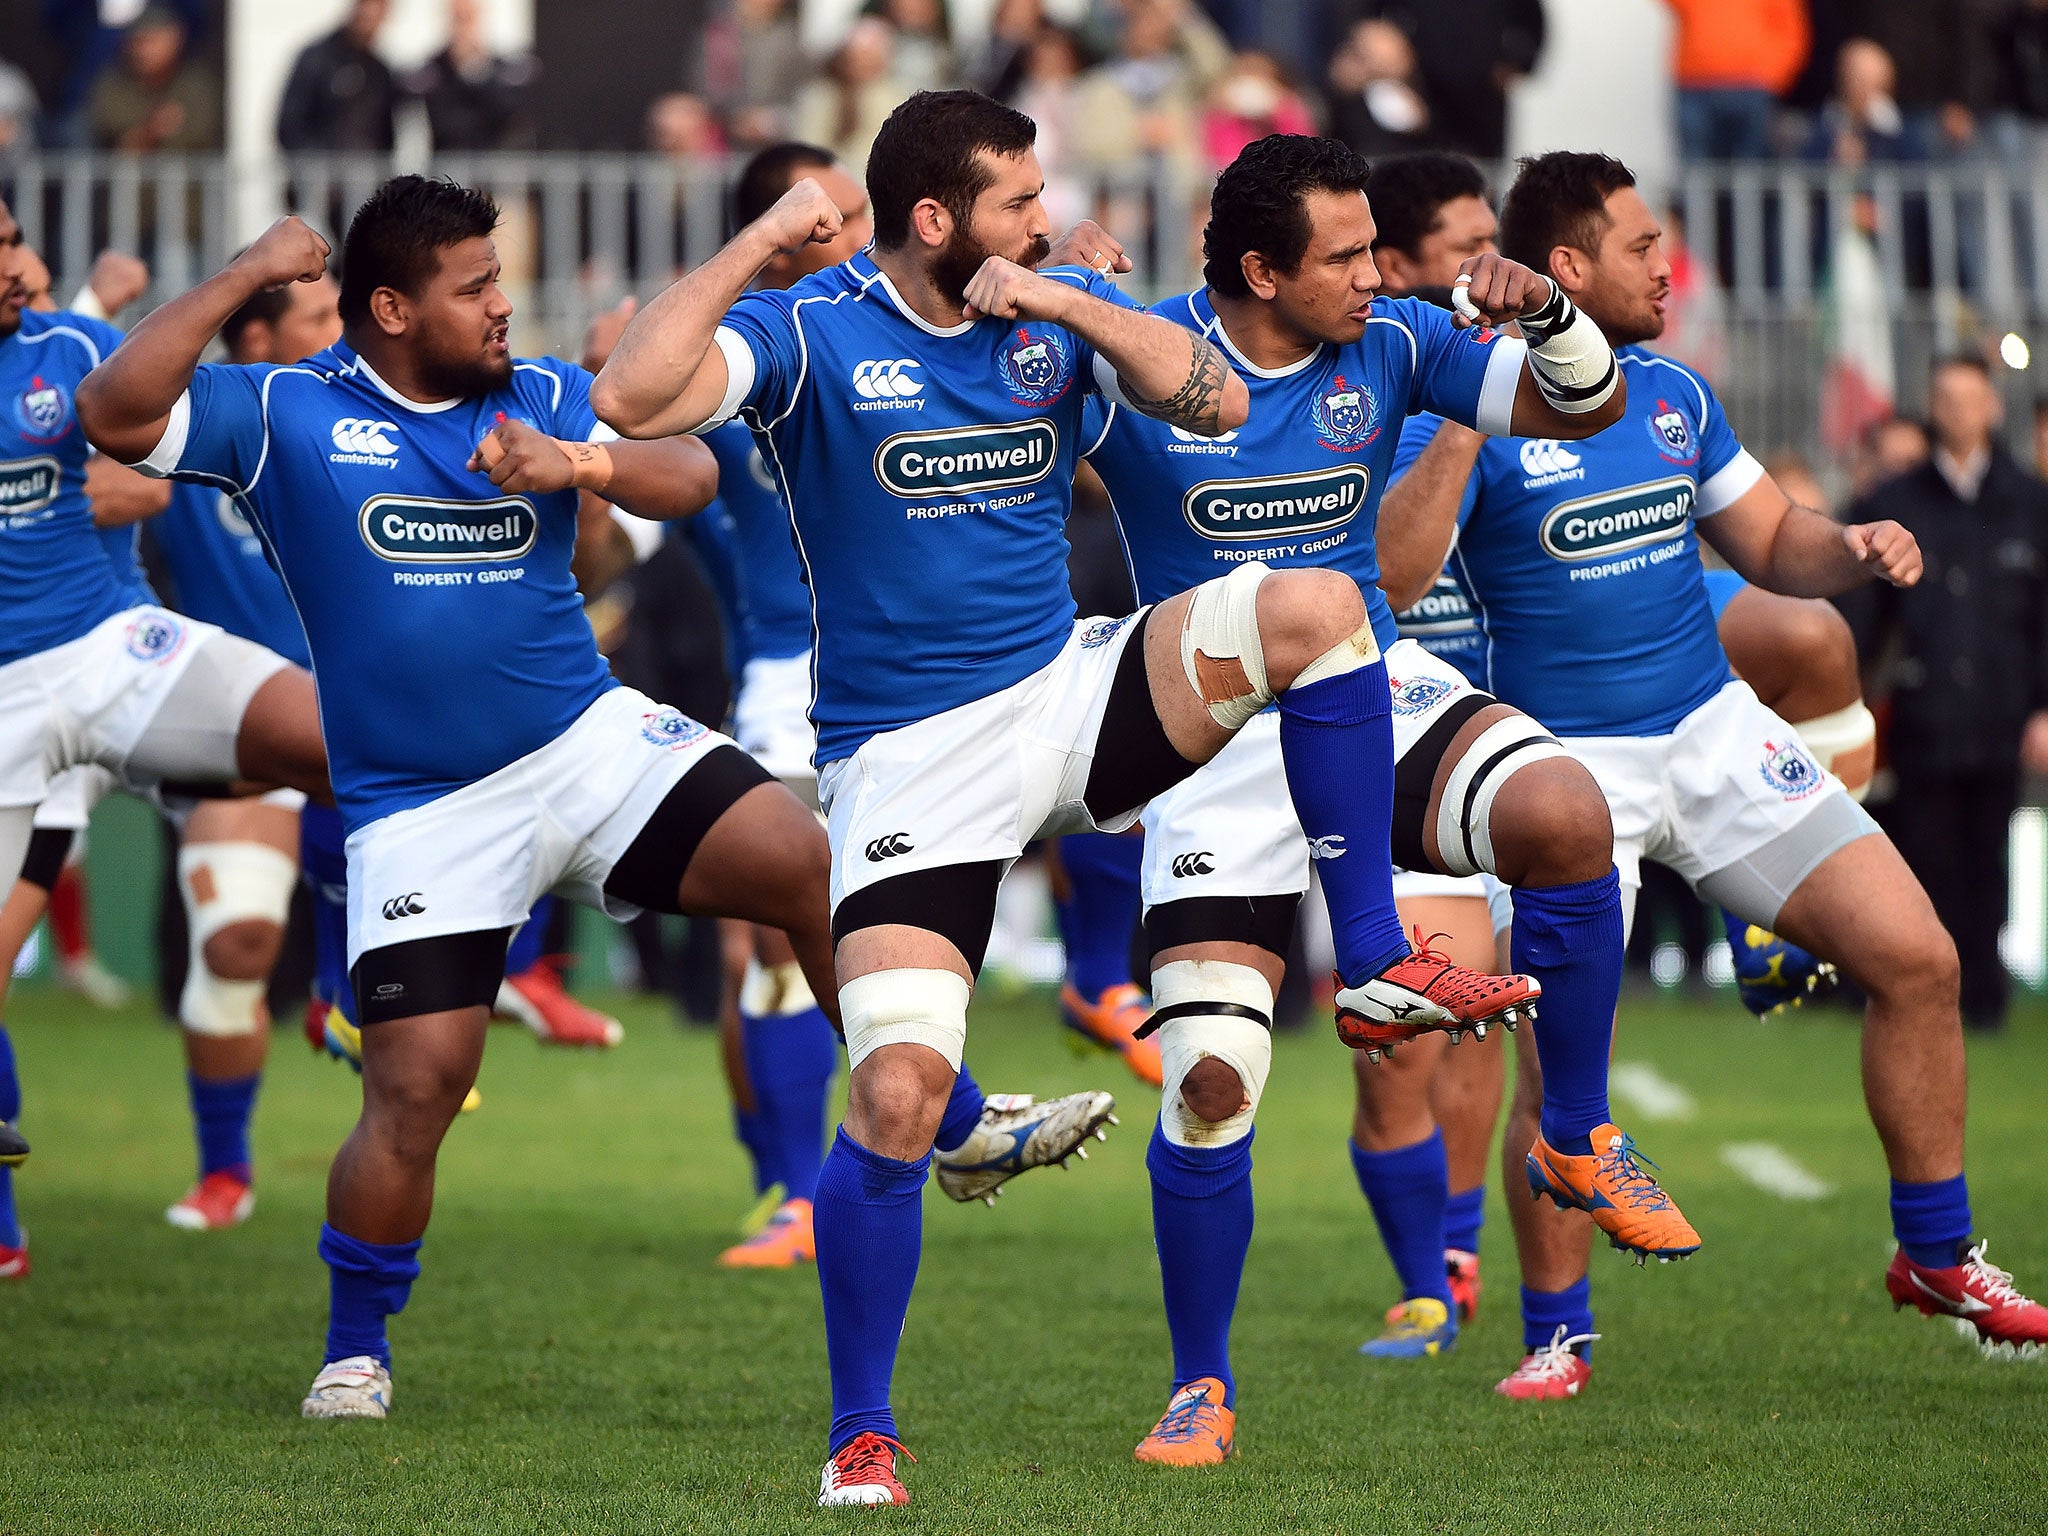 Samoa perform their traditional Siva Tau war dance before the match against Italy